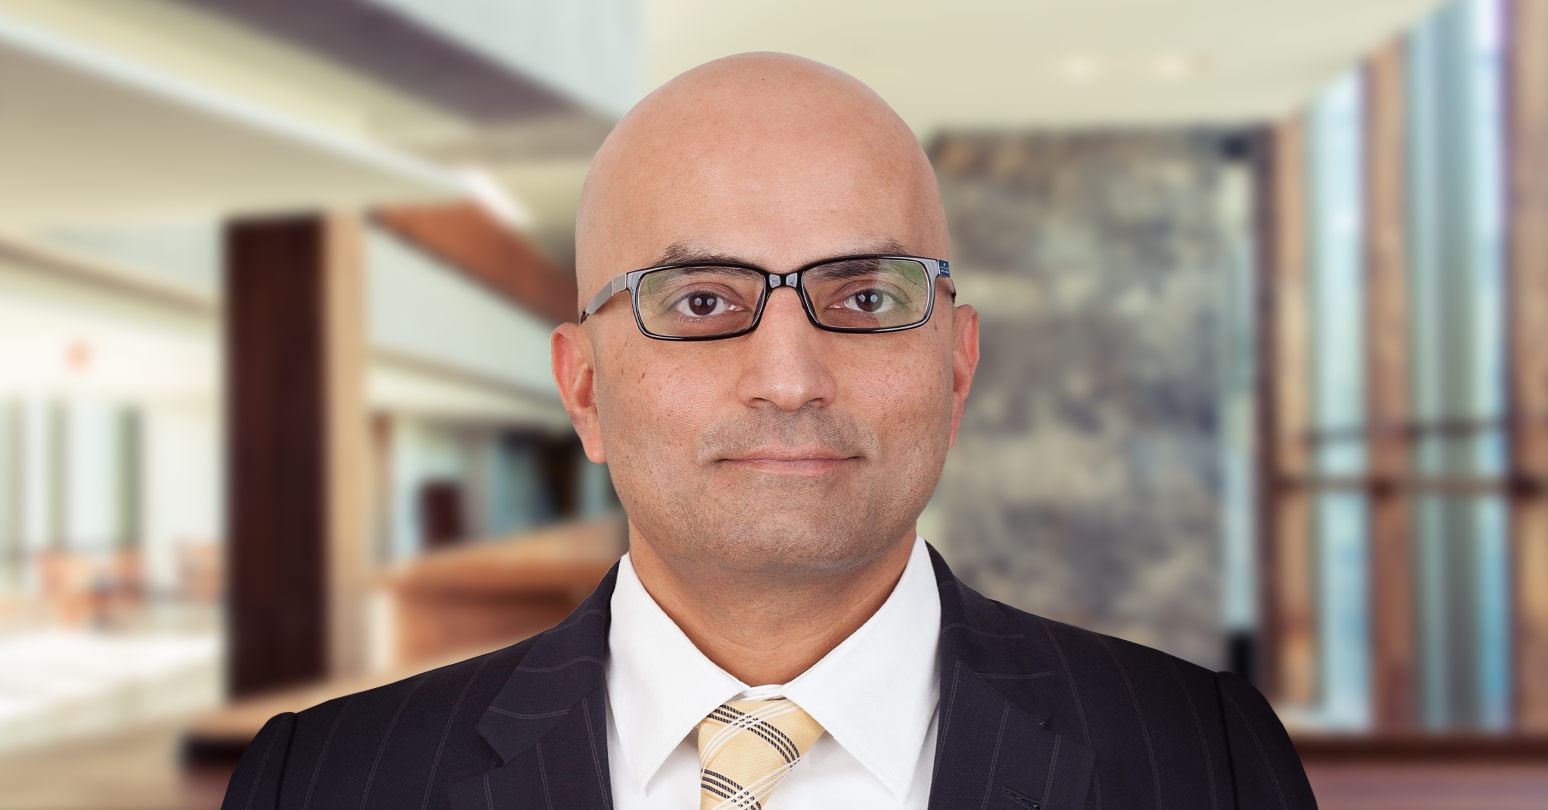 Rashid Wasti, EMBA ’03, to chair Ivey’s new Equity, Diversity, and Inclusion Advisory Council